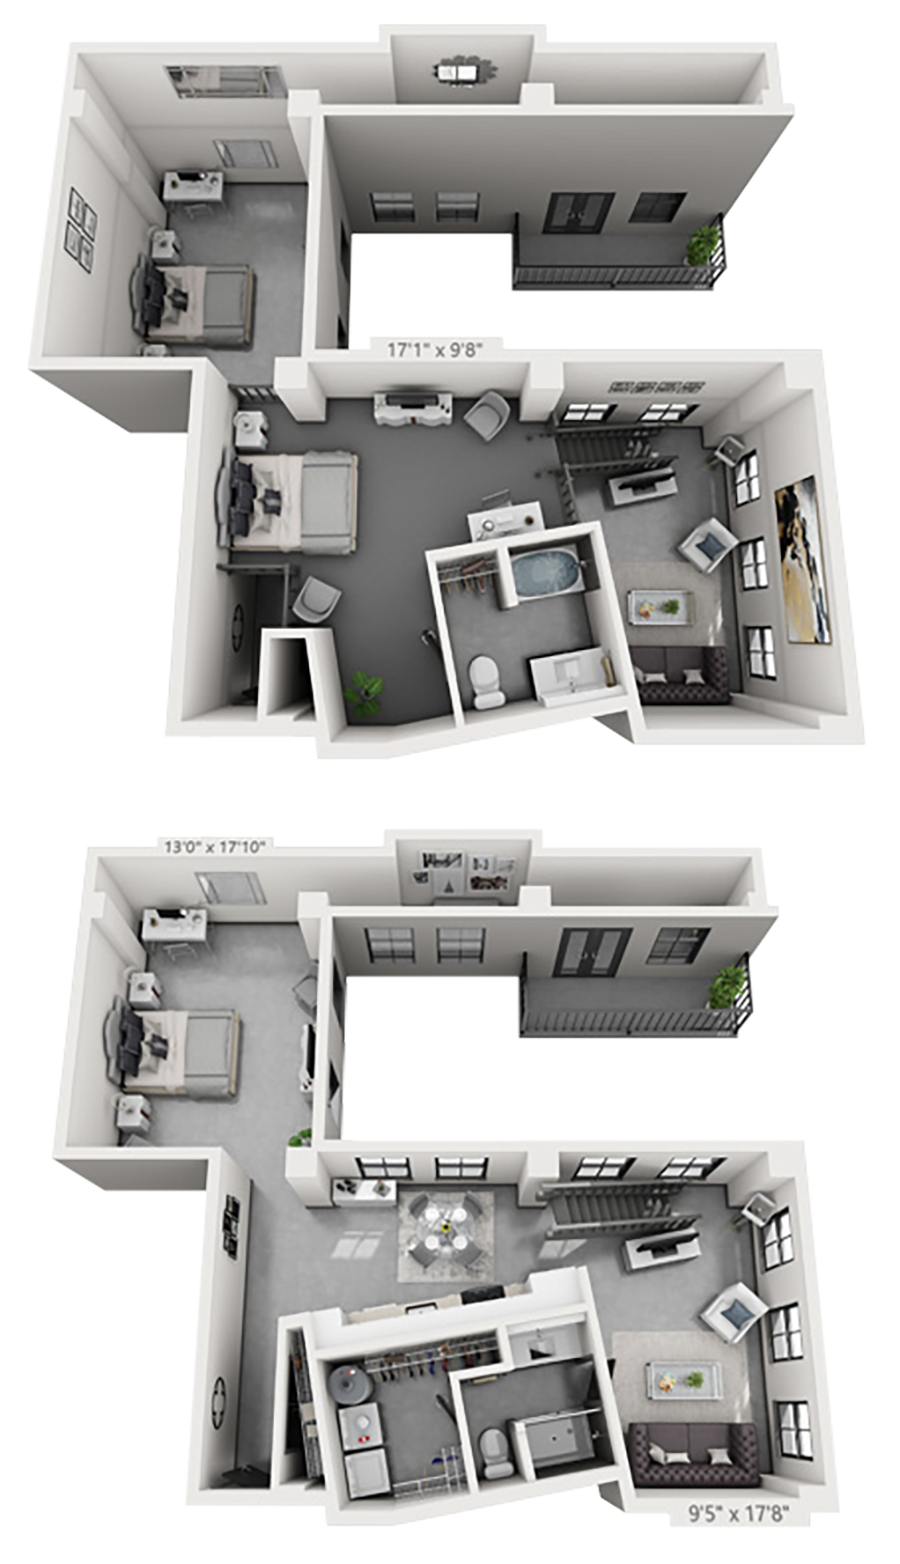 B19M plan is 2 bed, 2 bath and 1,781 square feet